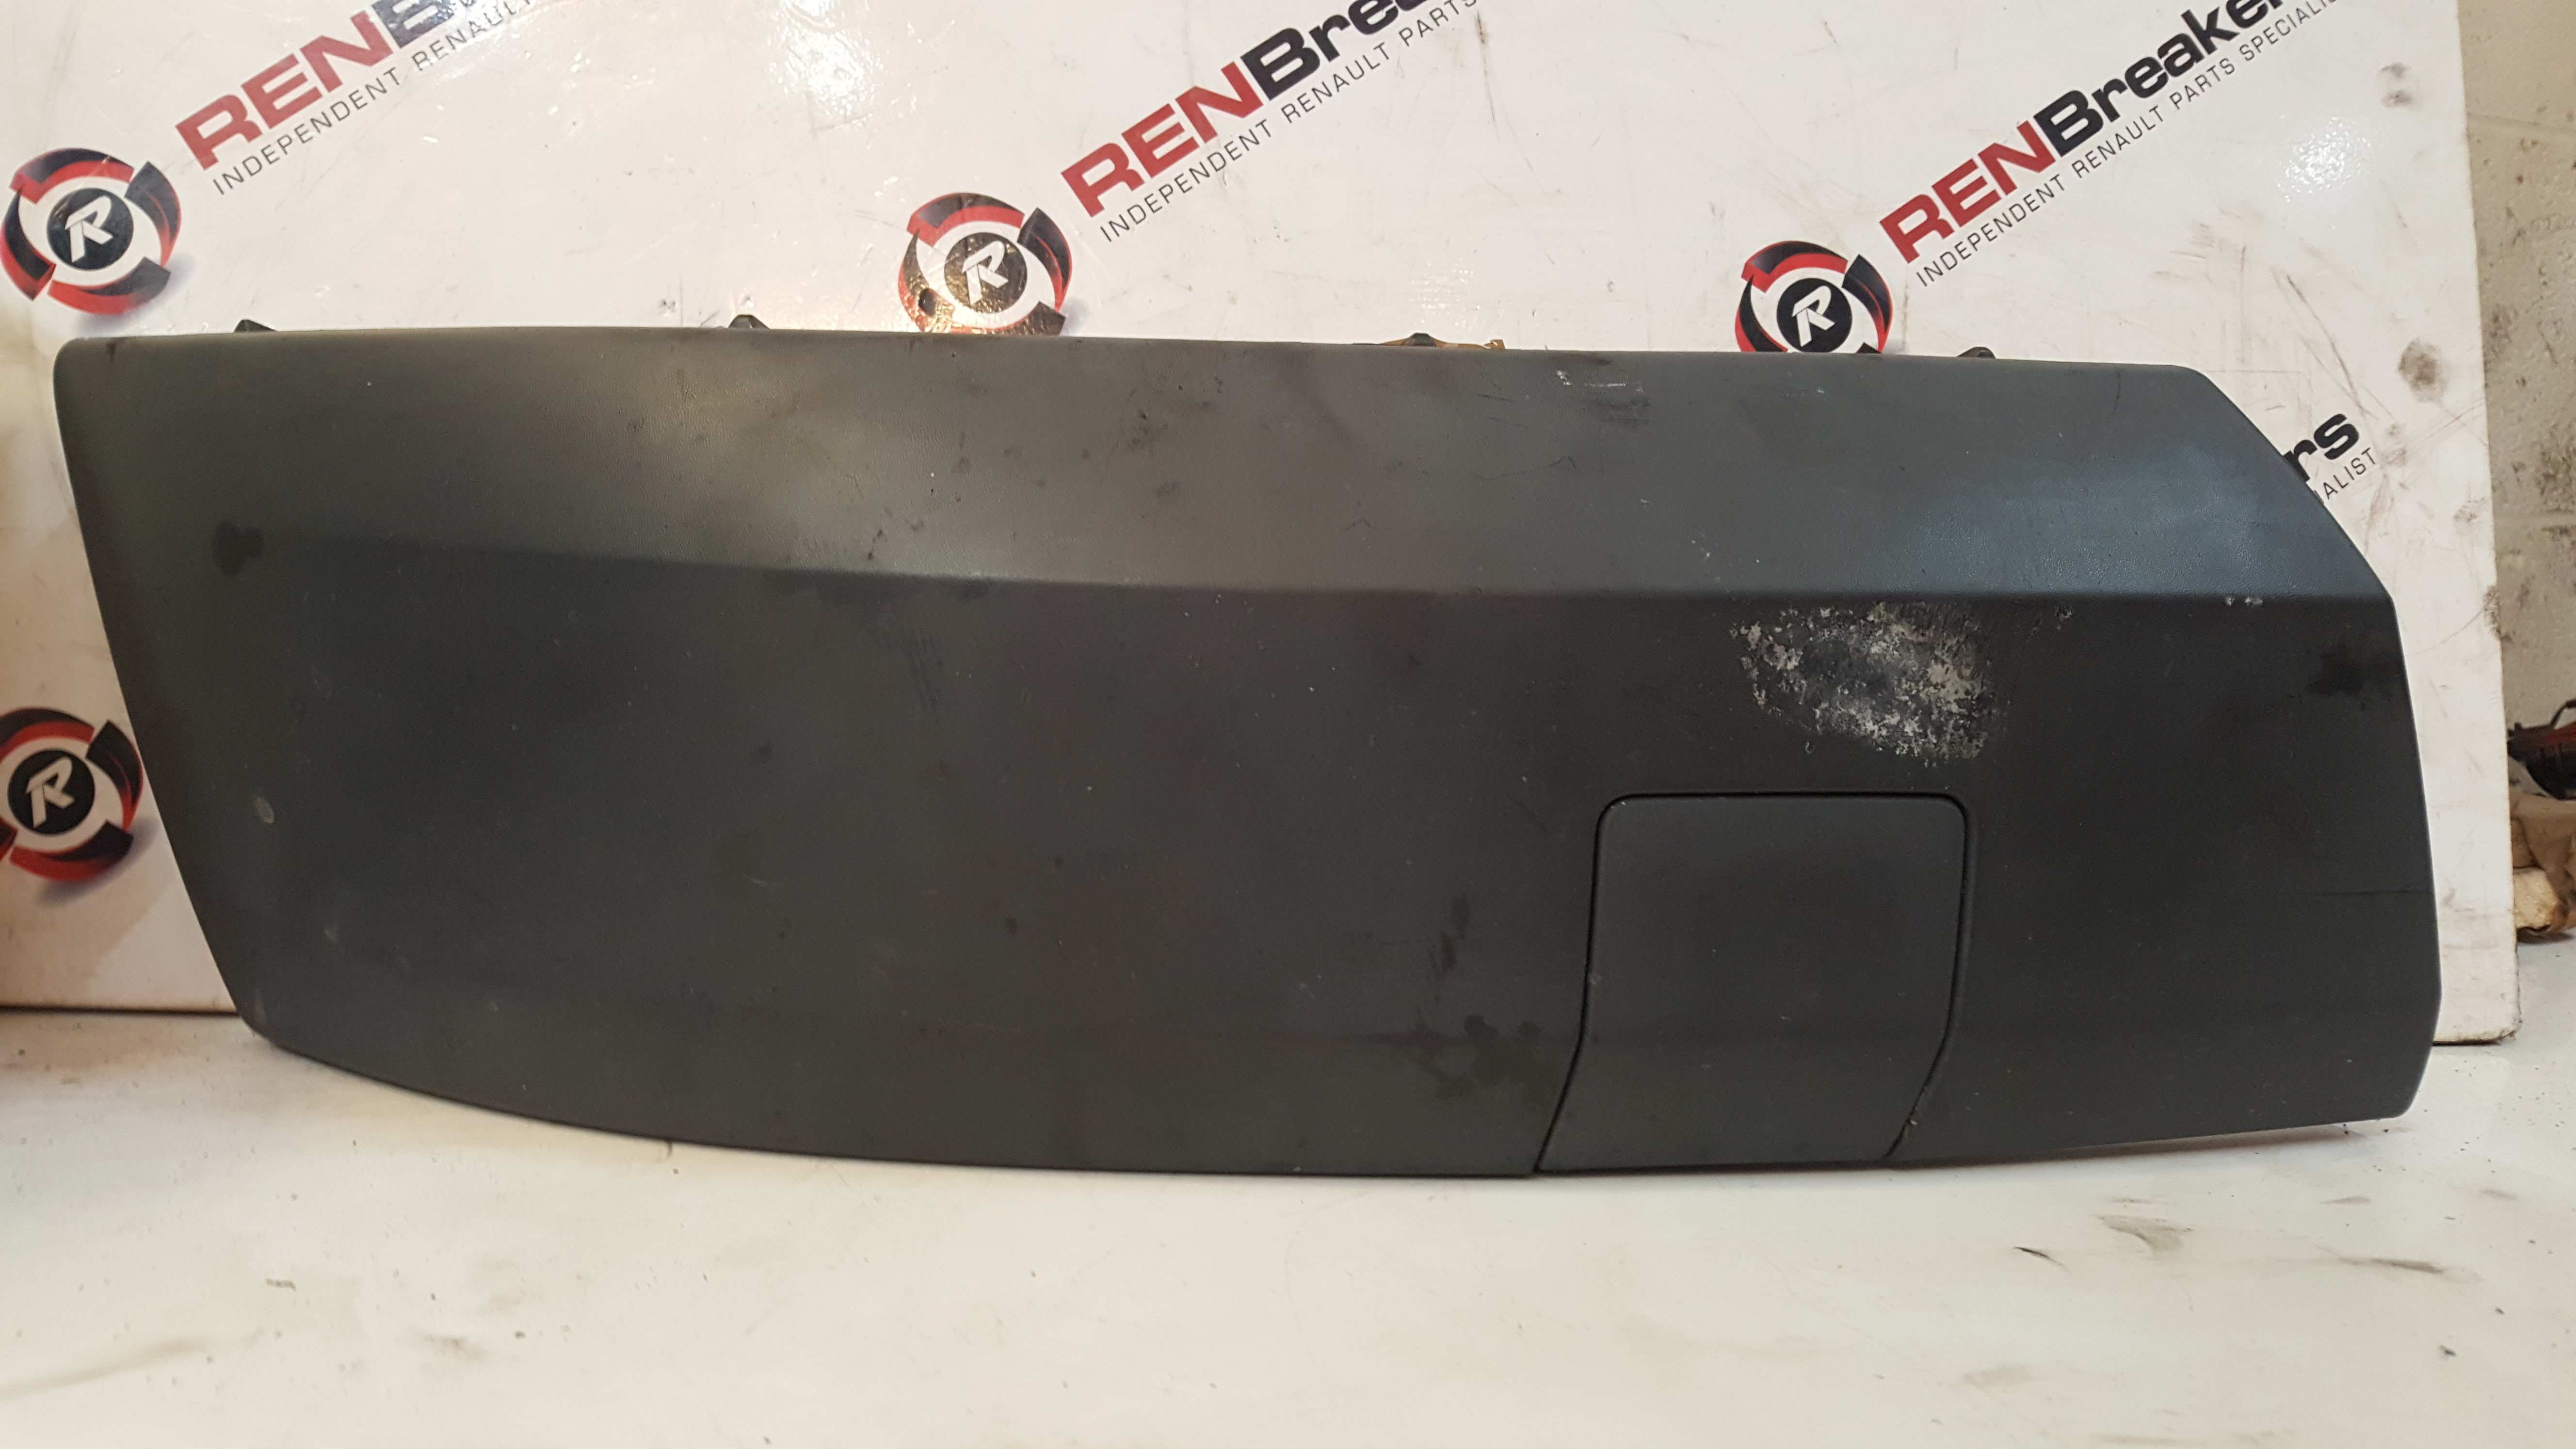 Renault Modus 2004-2008 Drivers OSF Os Front Bumper Moulding Trim  8200665837